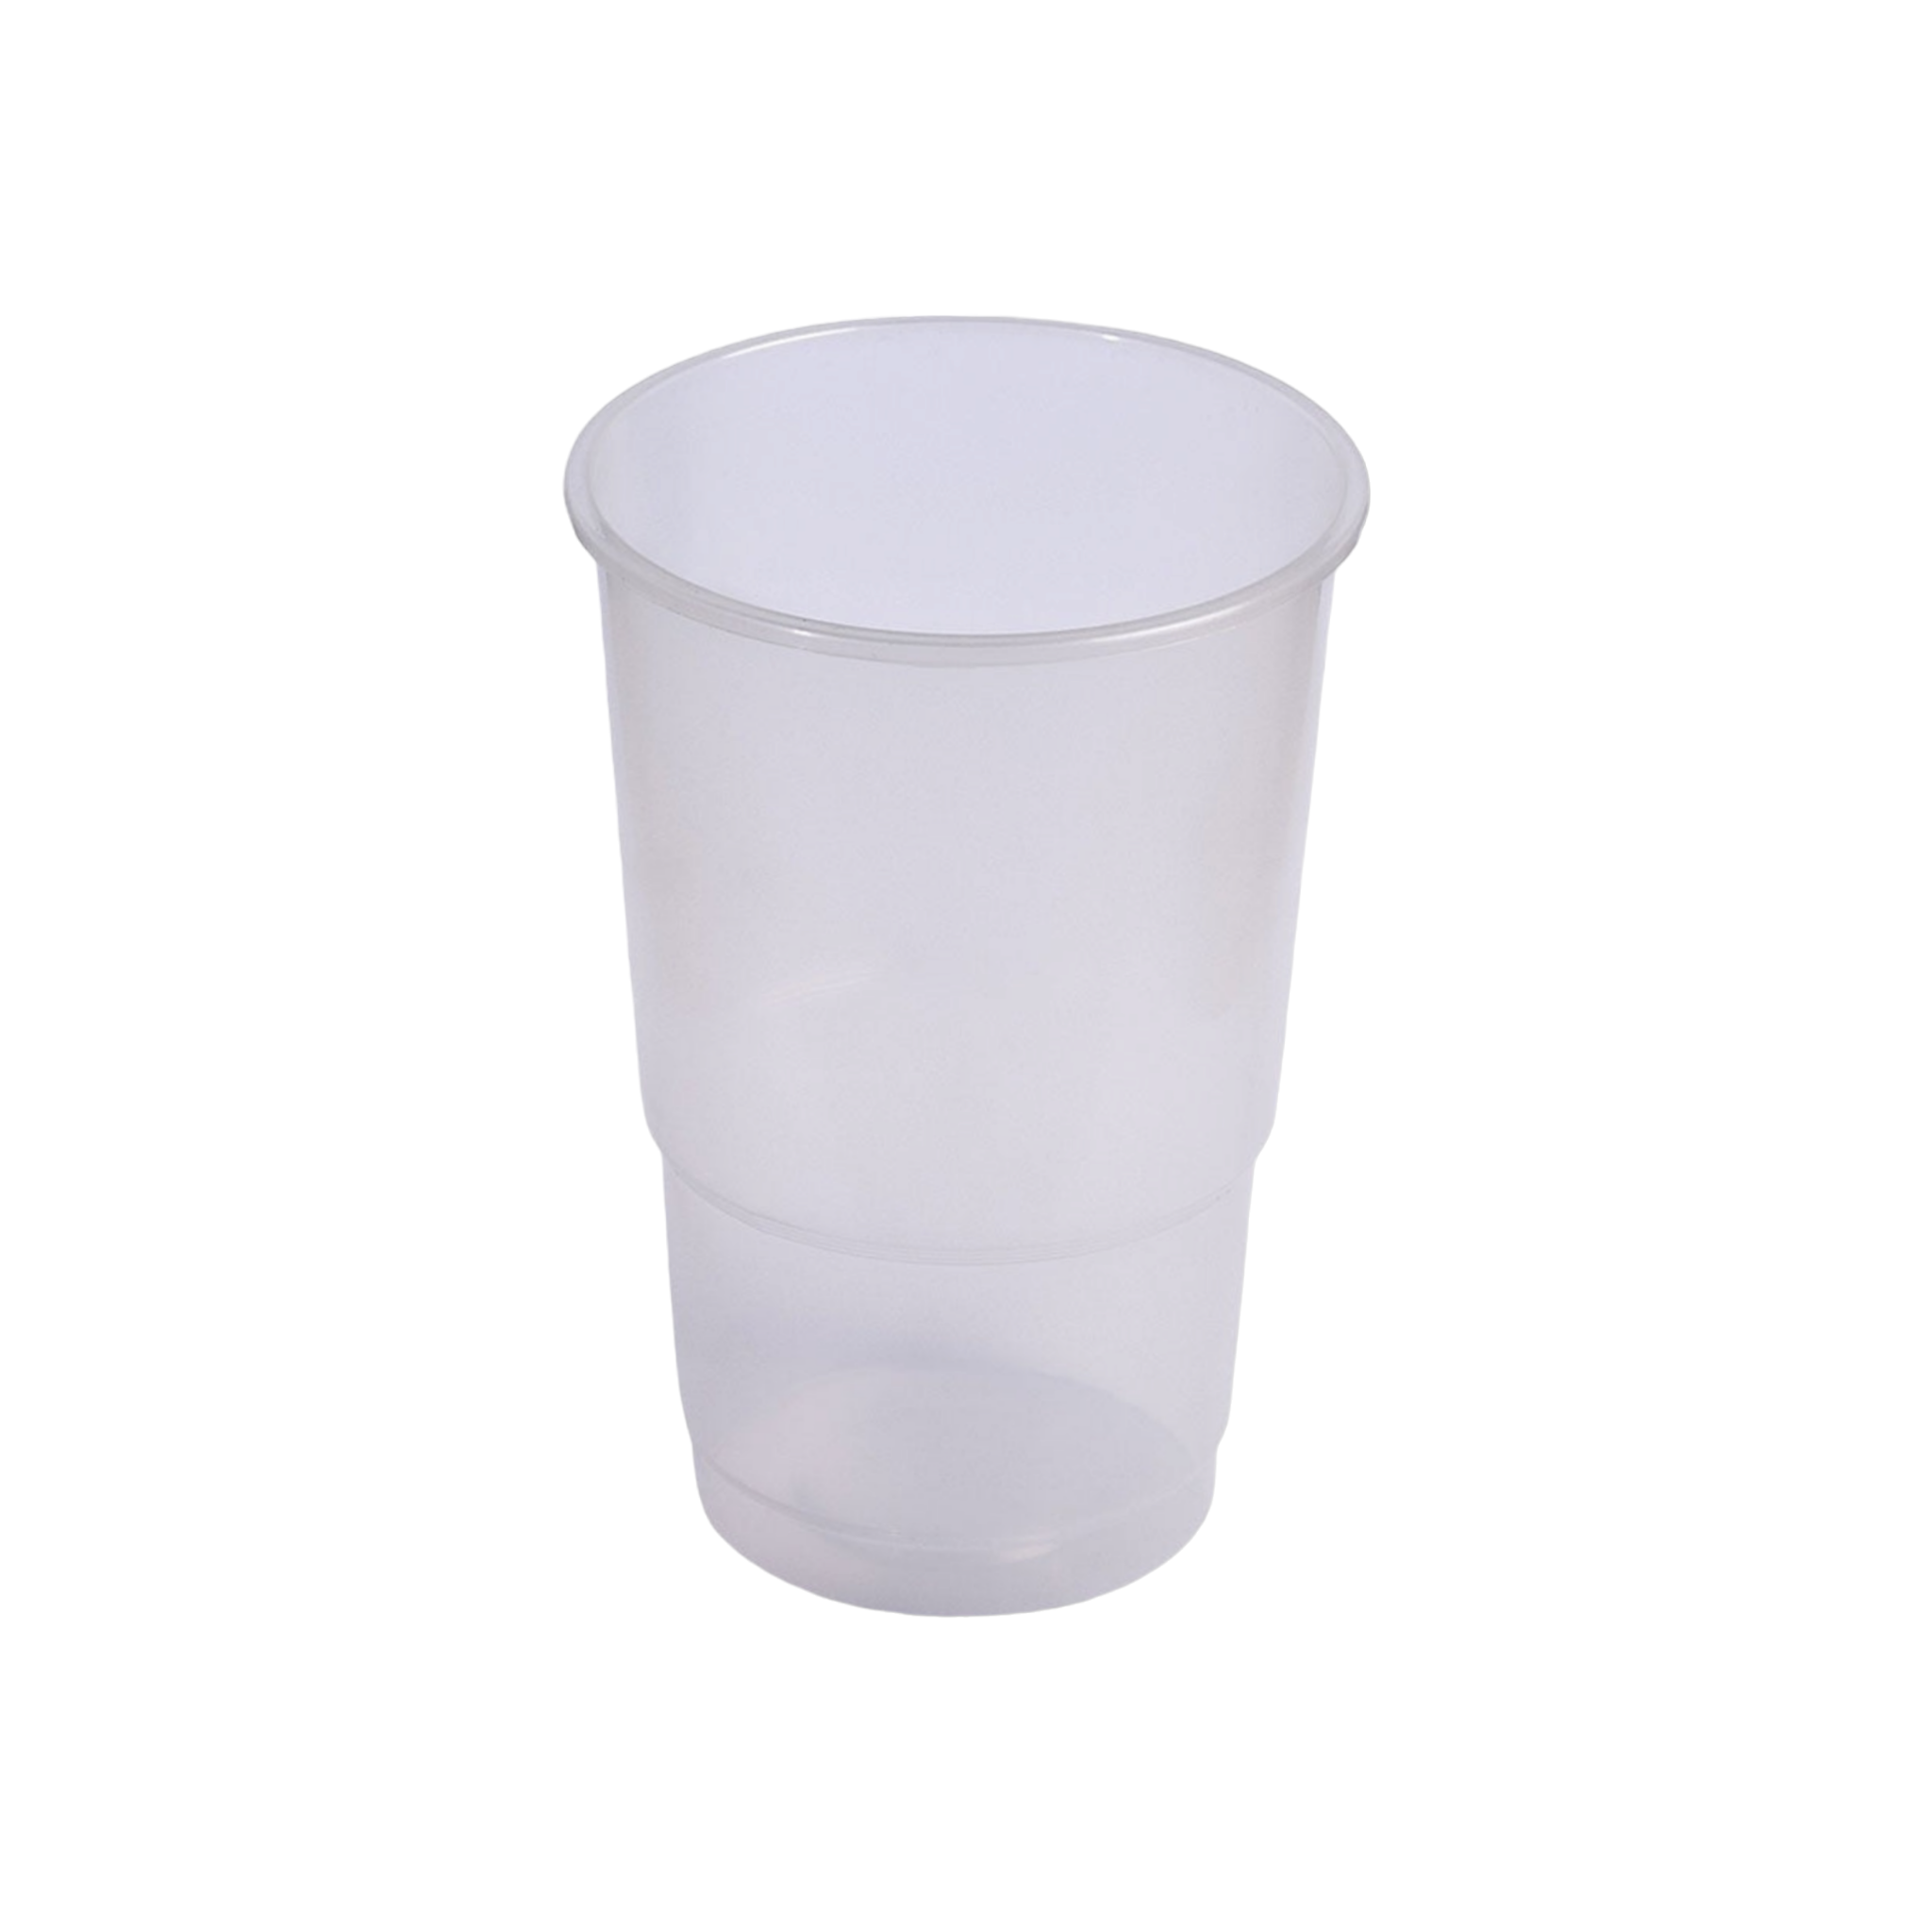 350ml Lucci Cup Plastic Clear 10pack